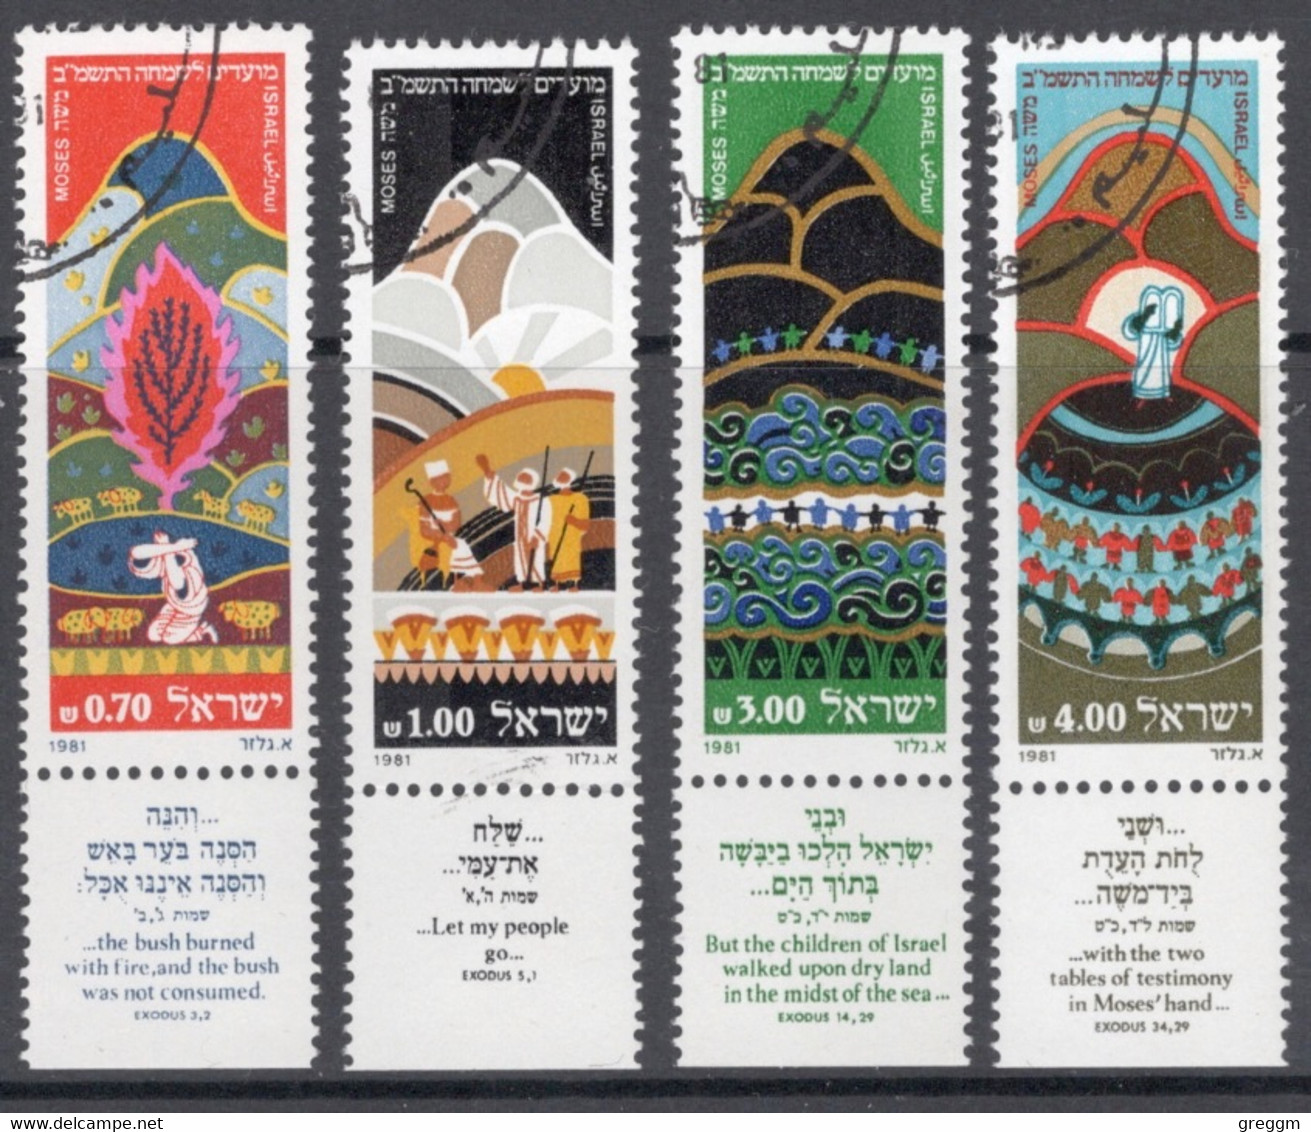 Israel 1981 Set Of Stamps Celebrating New Year In Fine Used With Tabs - Usati (con Tab)